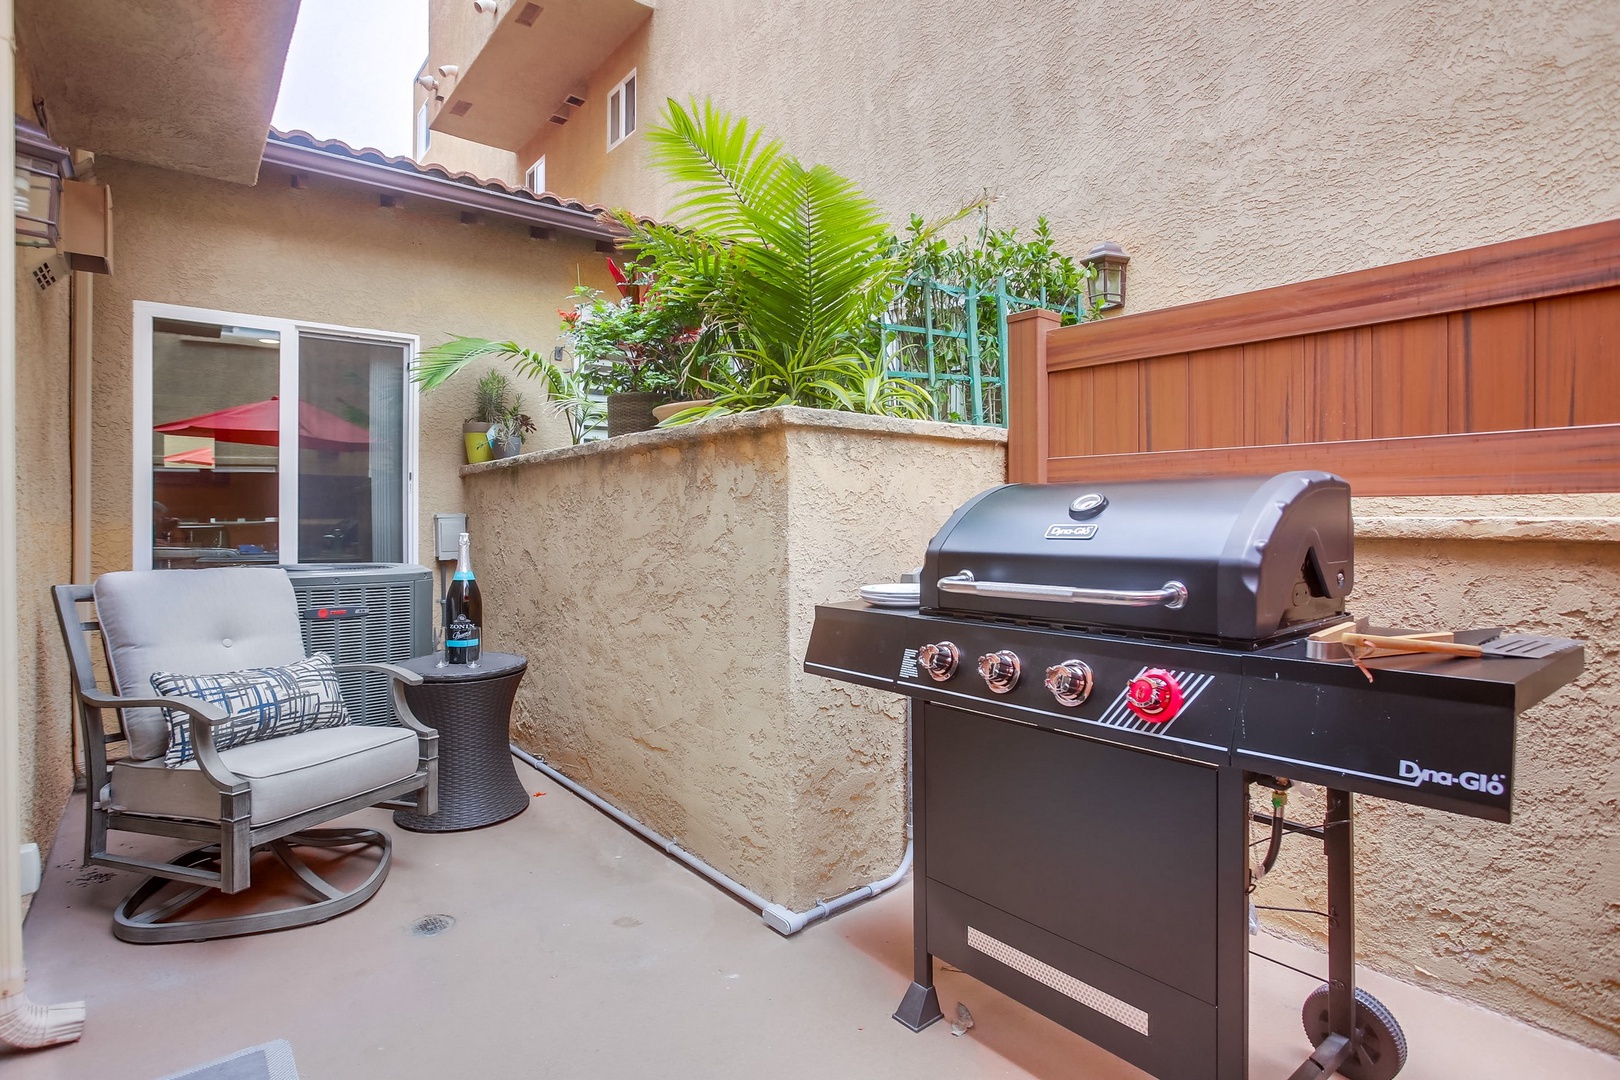 Private patio with BBQ